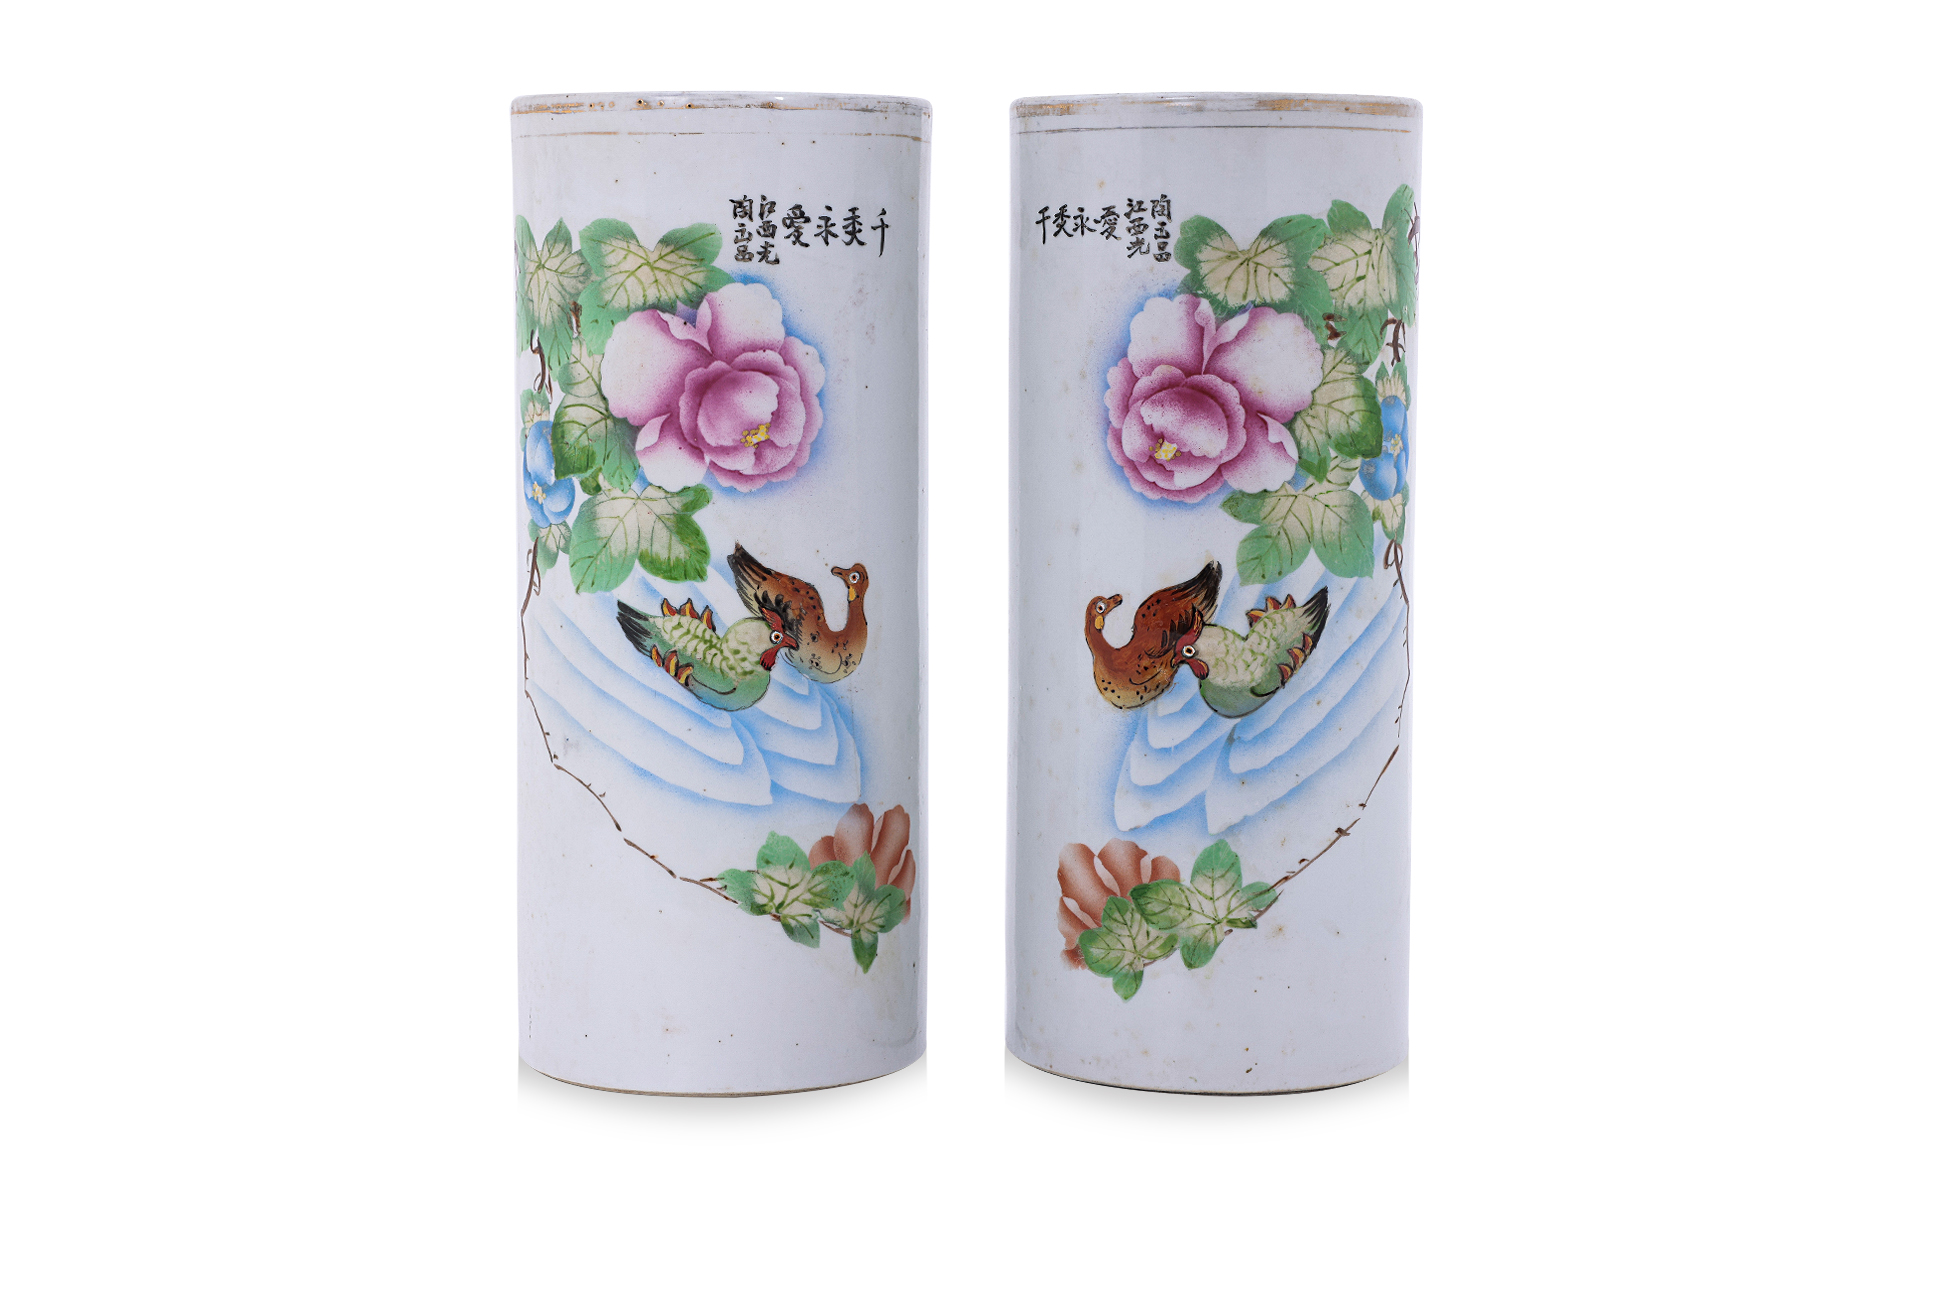 A PAIR OF FAMILLE ROSE CYLINDRICAL PORCELAIN VASES